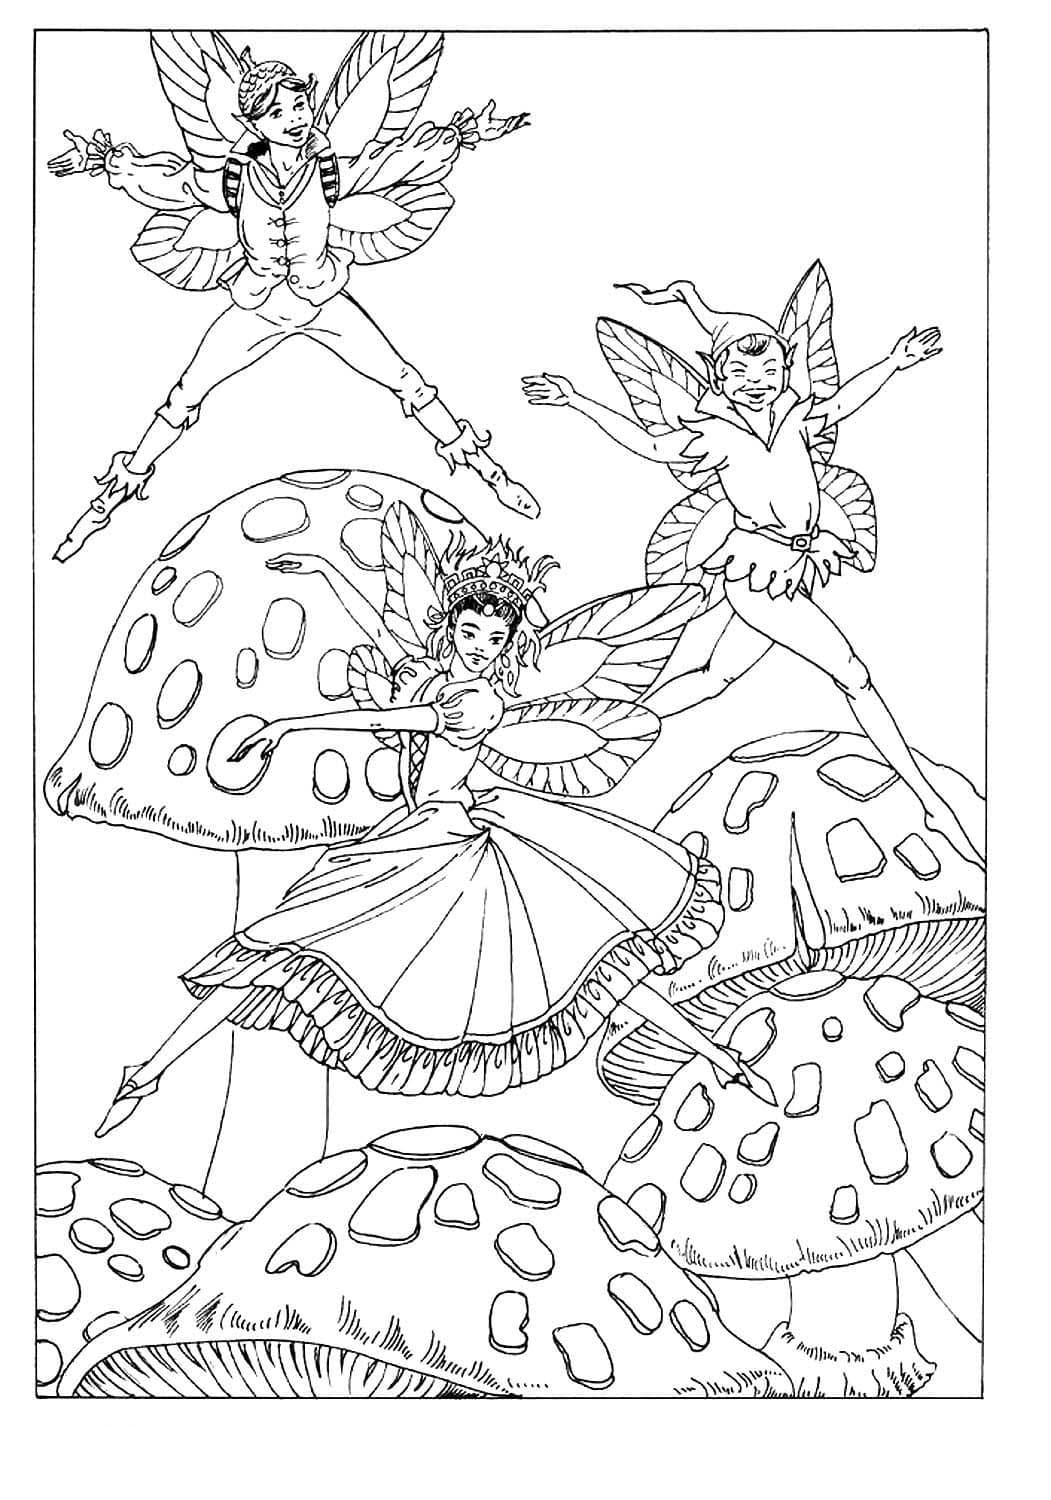 Trois Elfes coloring page